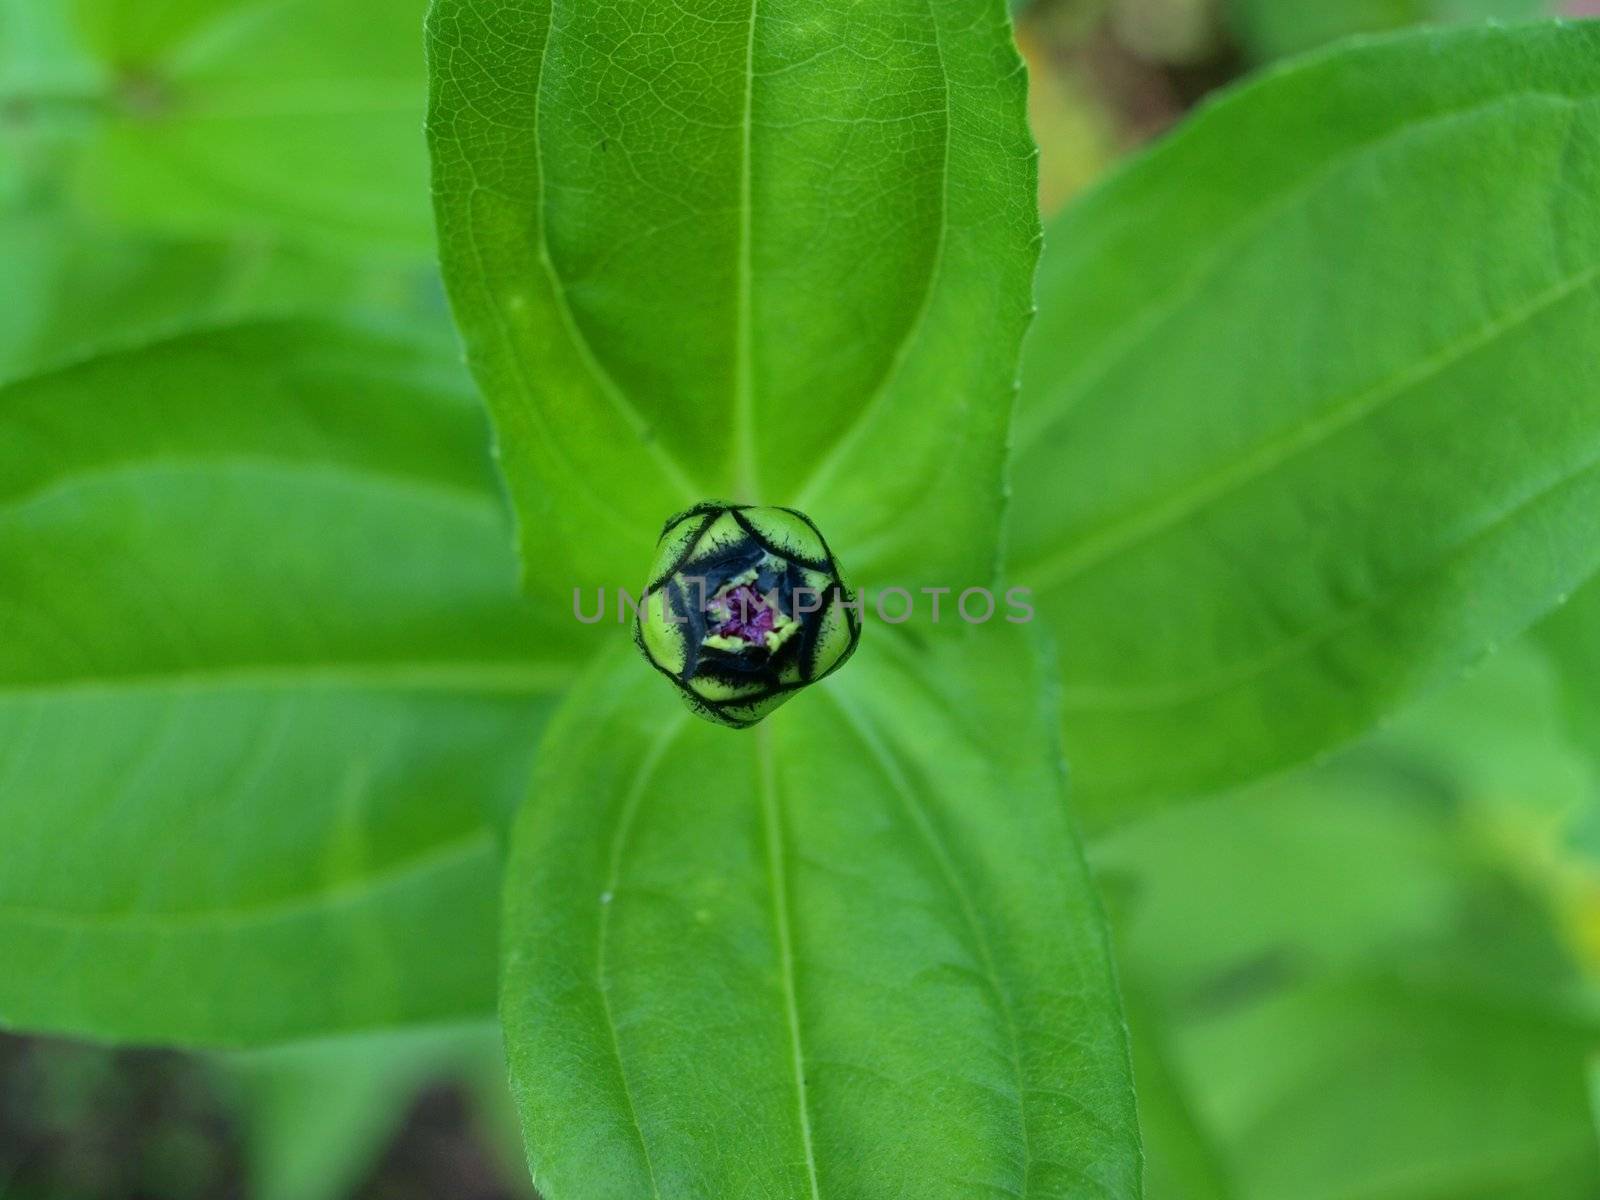 Compact violet flower bud against bright green leaves